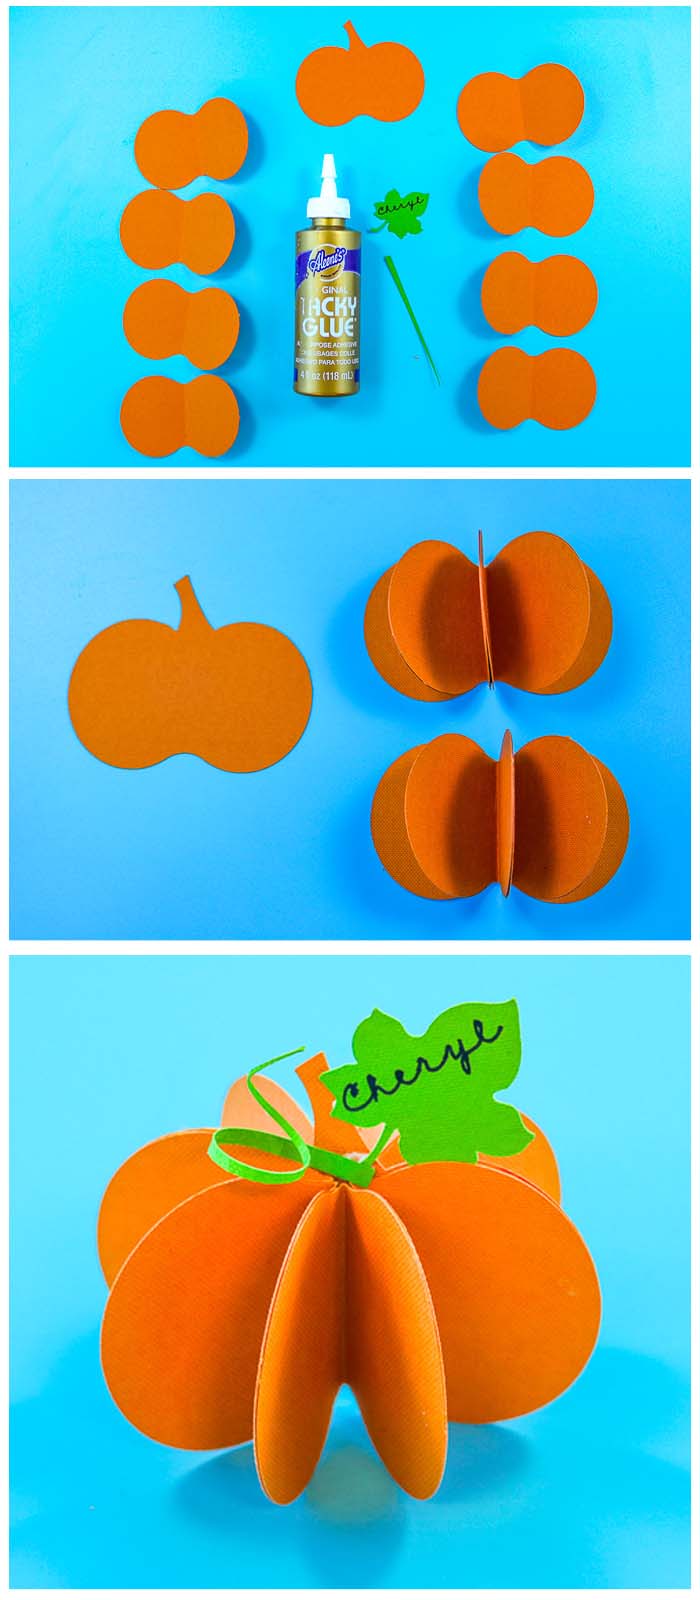 Pumpkin Place Cards Step by Step Instructions - Easy to make and perfect for Halloween through Thanksgiving